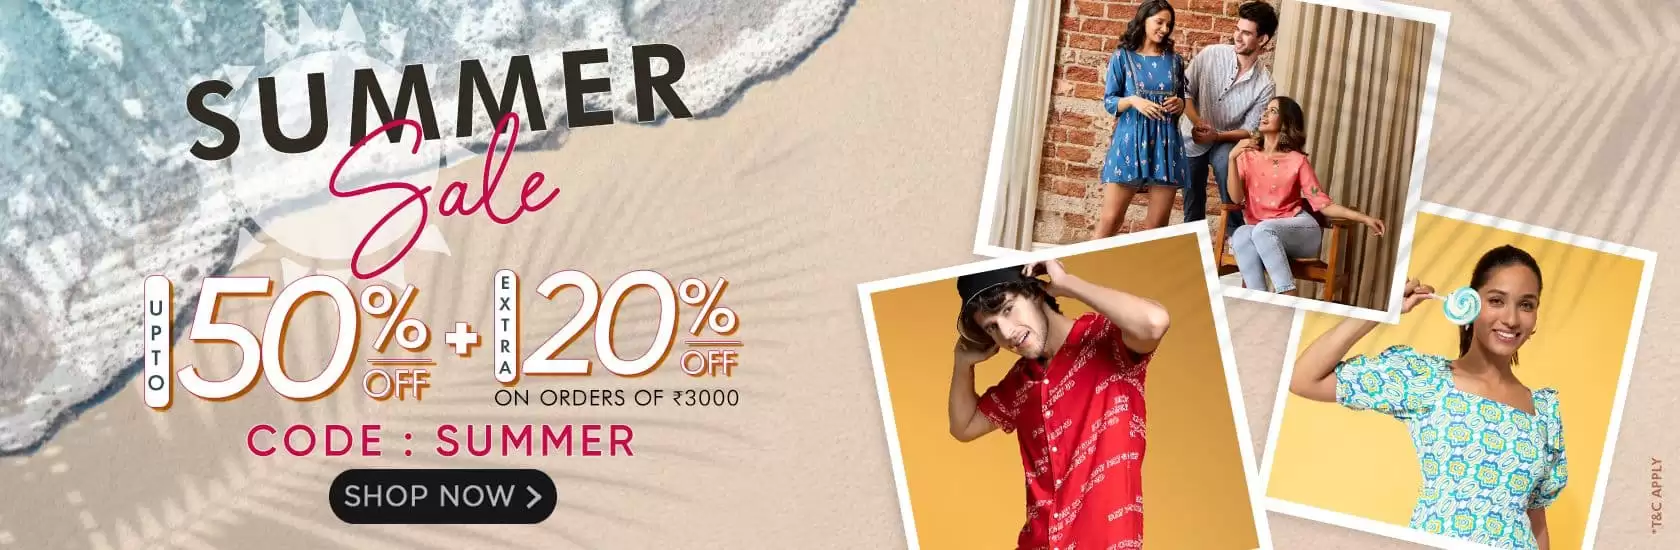 Pantaloons Summer Sale Coupon Get Extra 20% Off